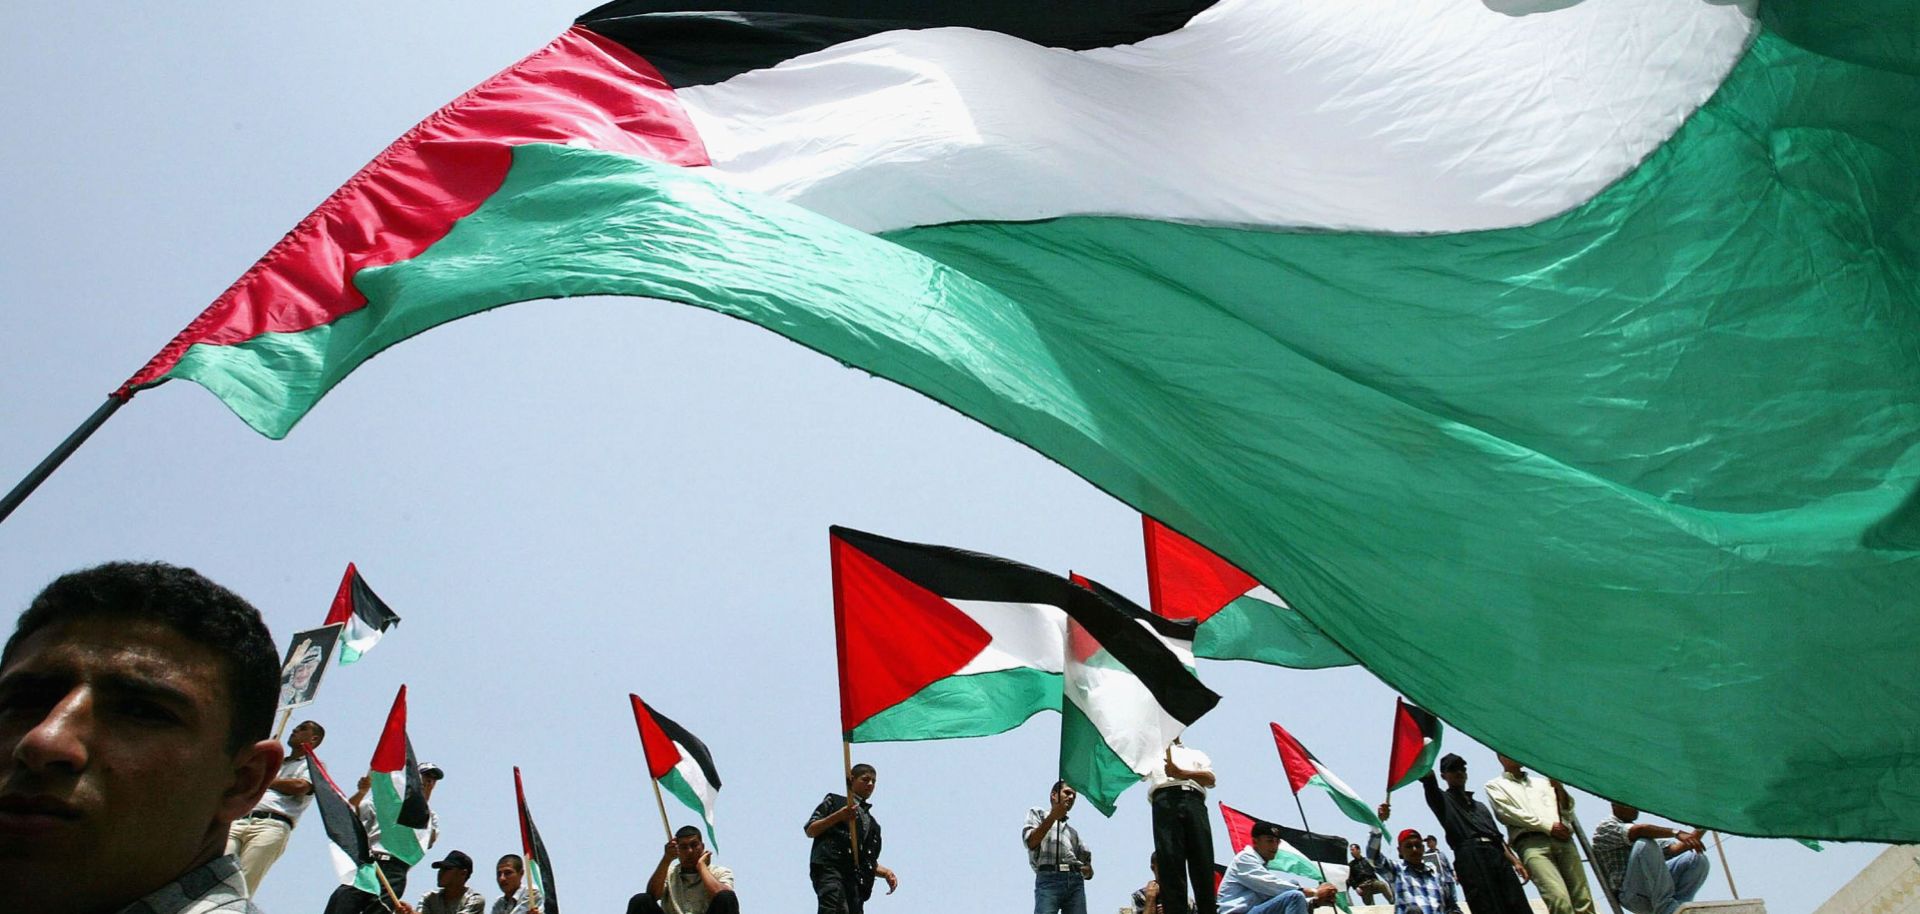 Relatives of Palestinian prisoners being held in Israeli jails wave their national flags as they attend a rally, calling for their release in 2003 in Gaza City, the Gaza Strip.